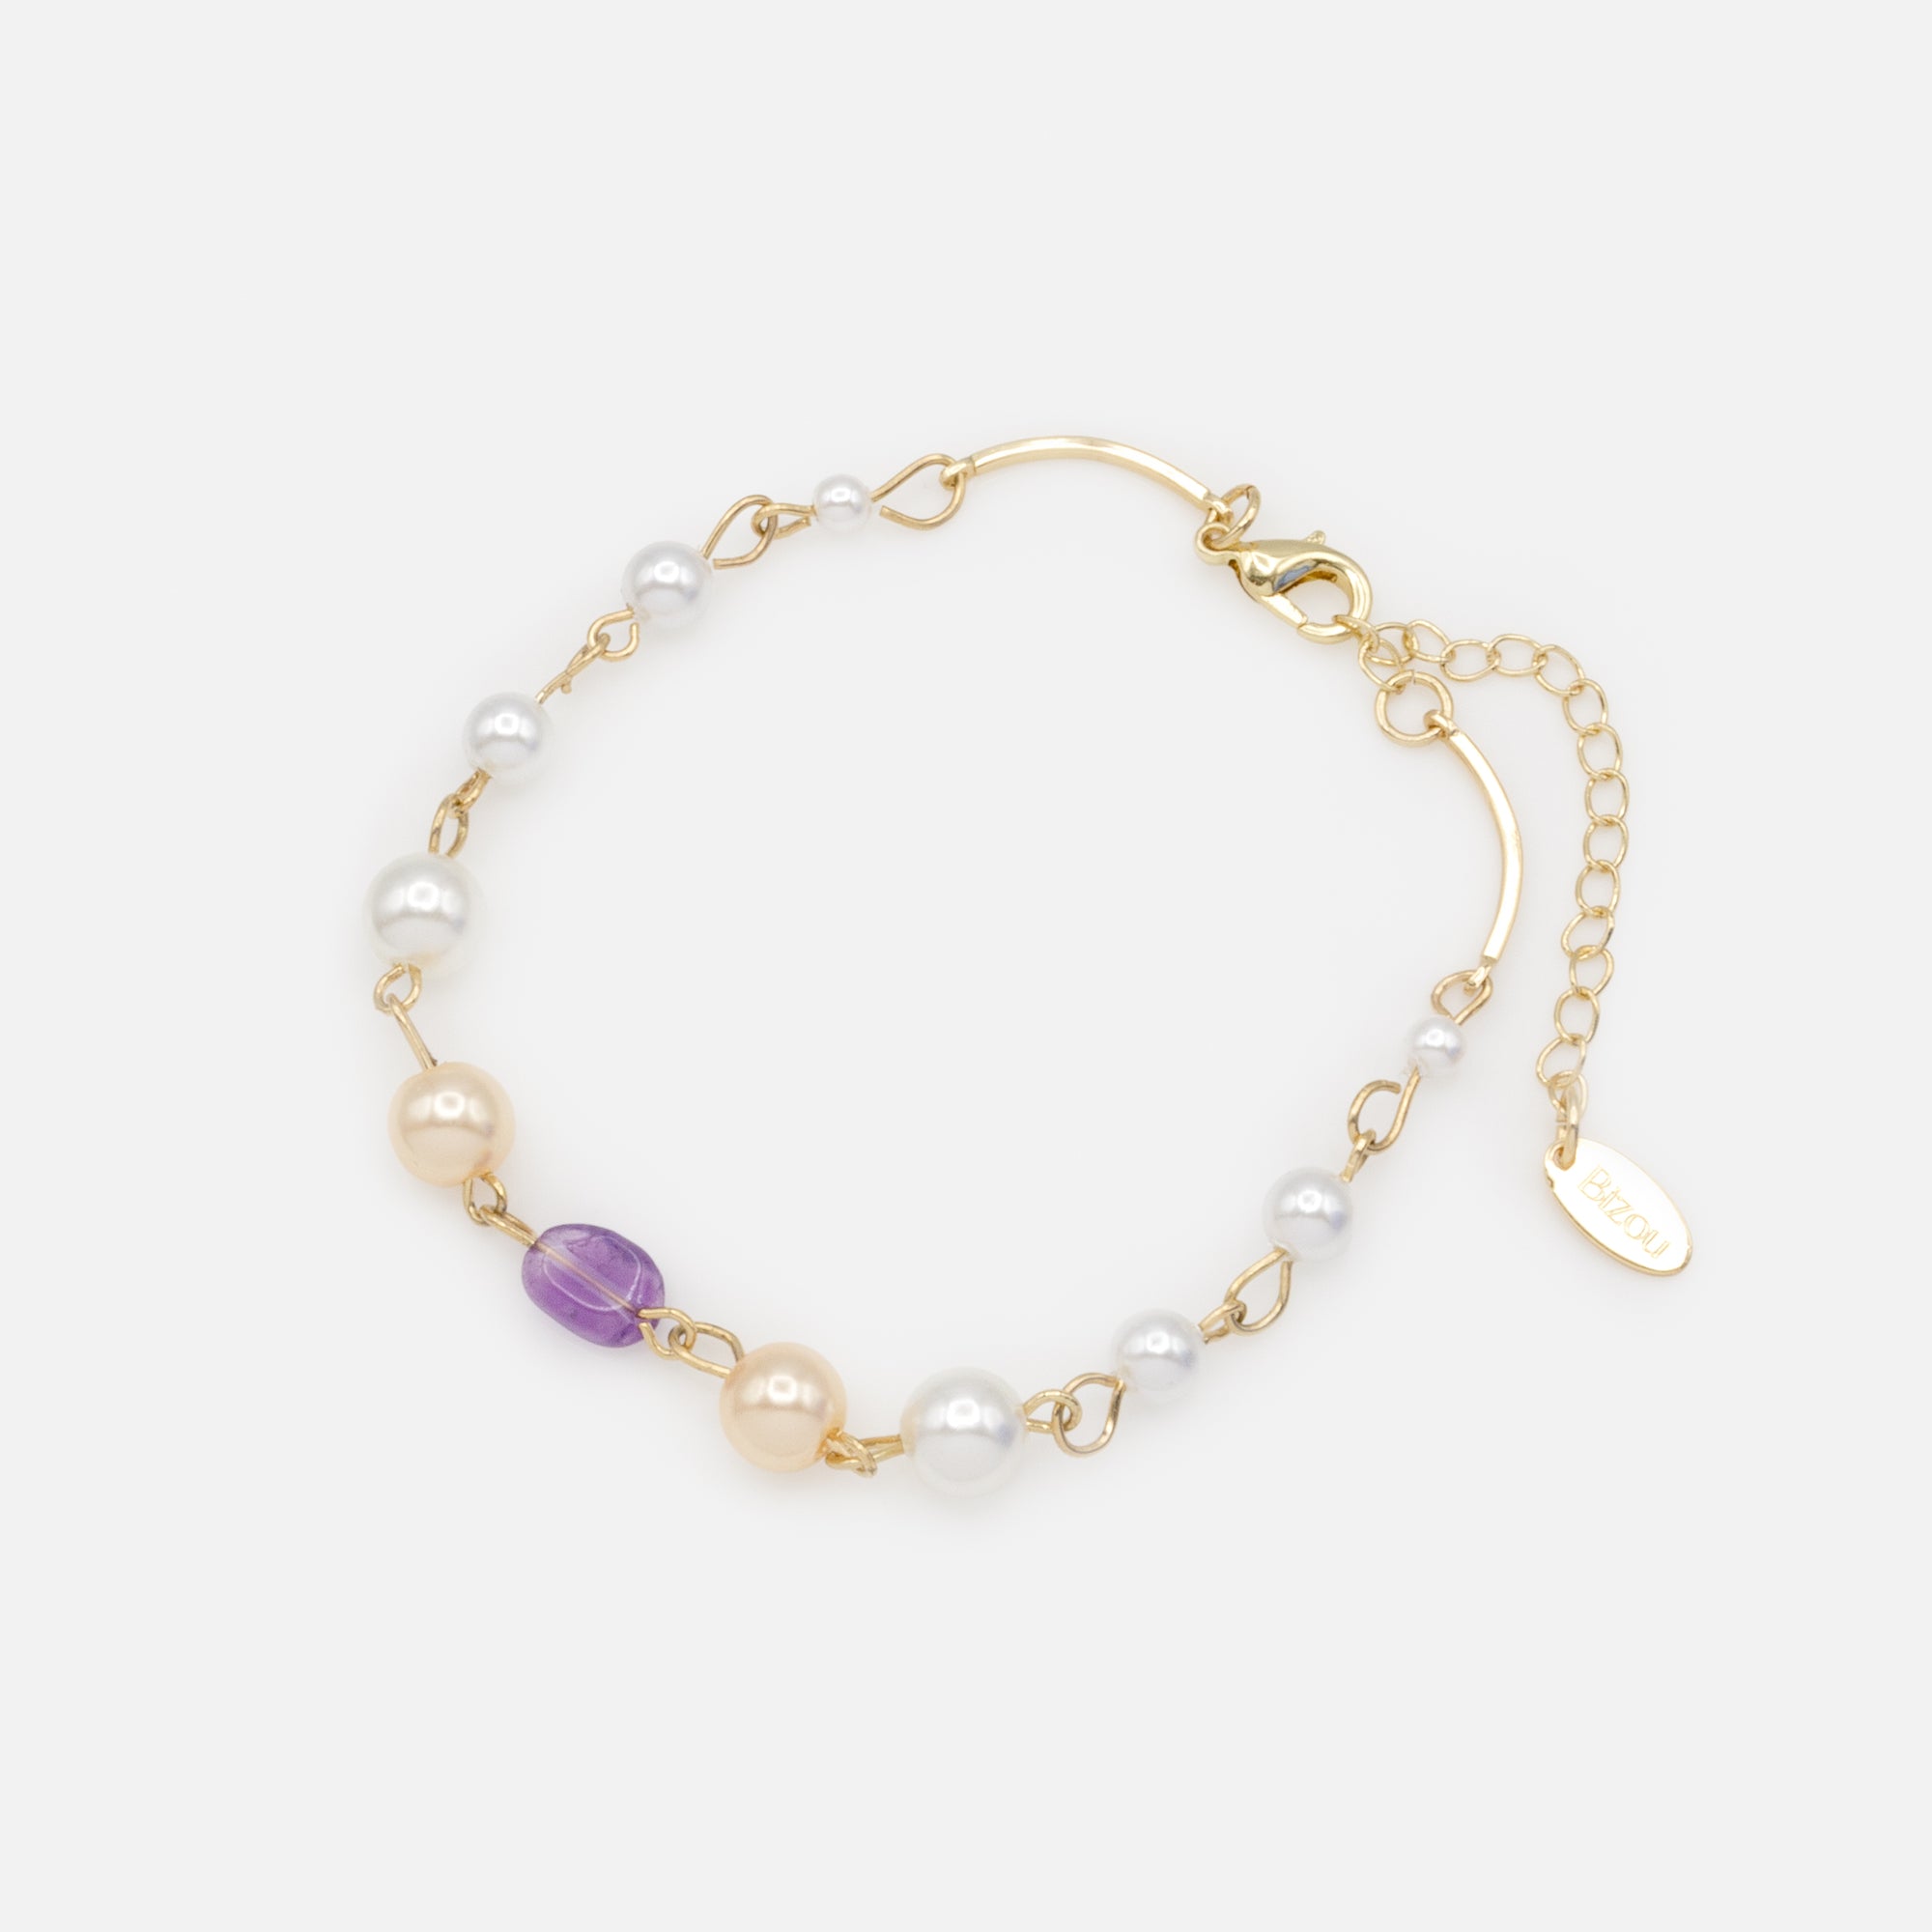 Gold bracelet with two-tone beads and purple stone